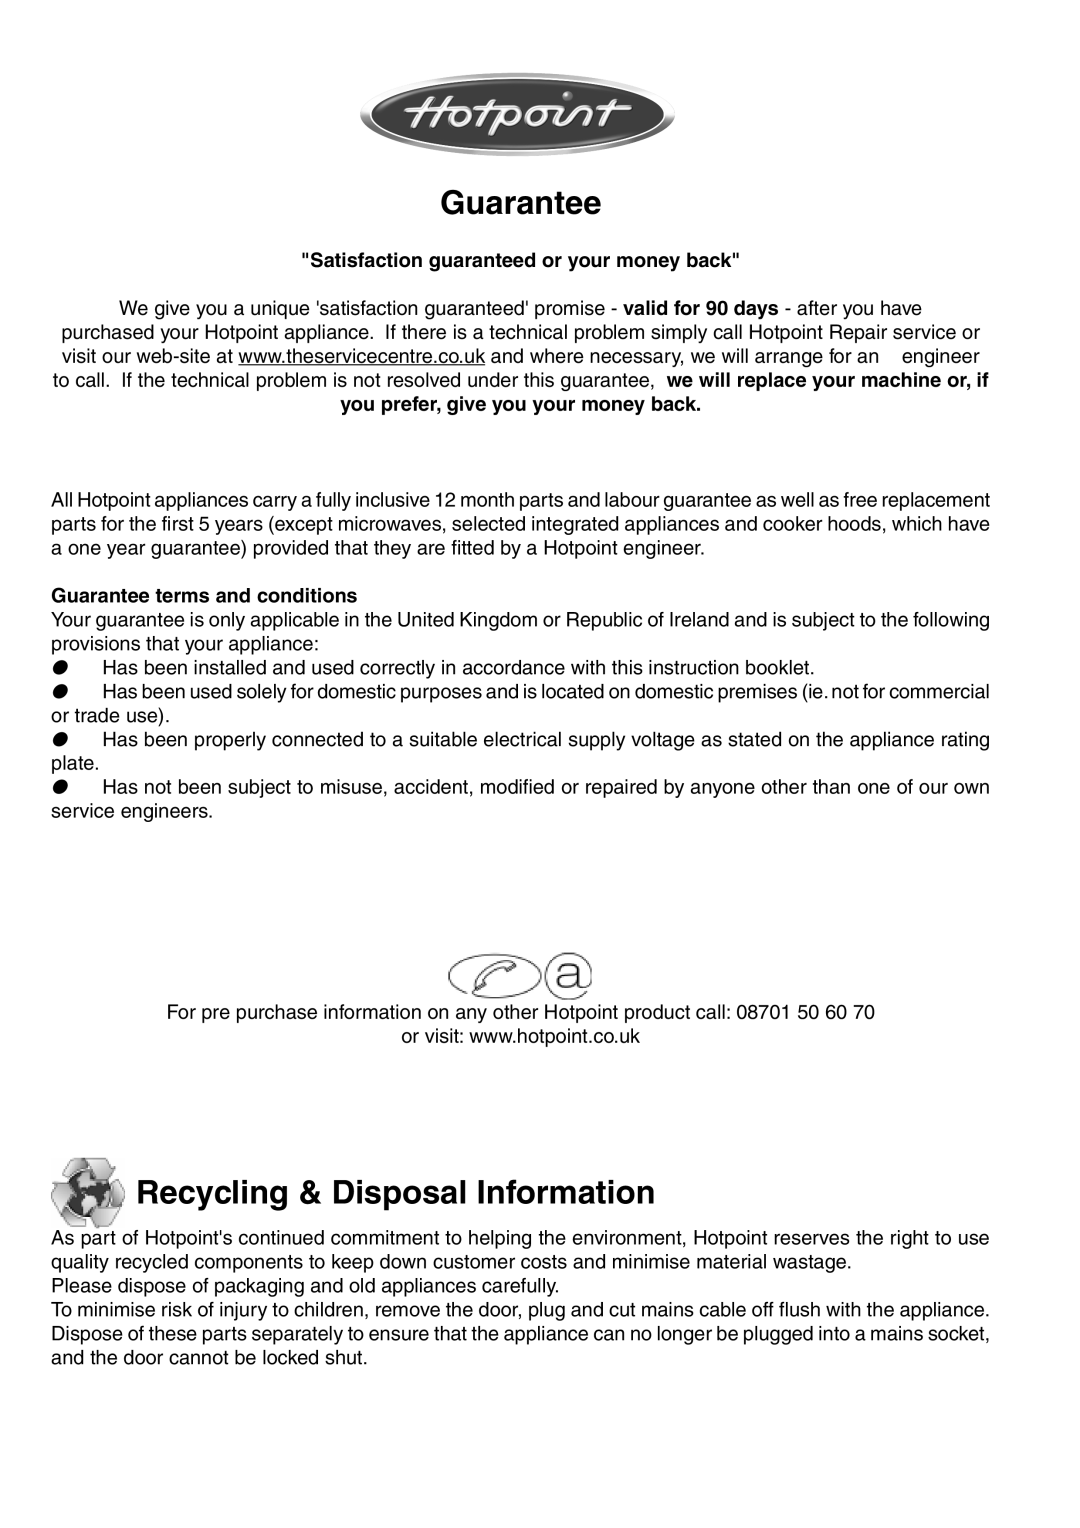 Hotpoint SD98, ST98, SC98 manual Guarantee, Recycling & Disposal Information, Satisfaction guaranteed or your money back 